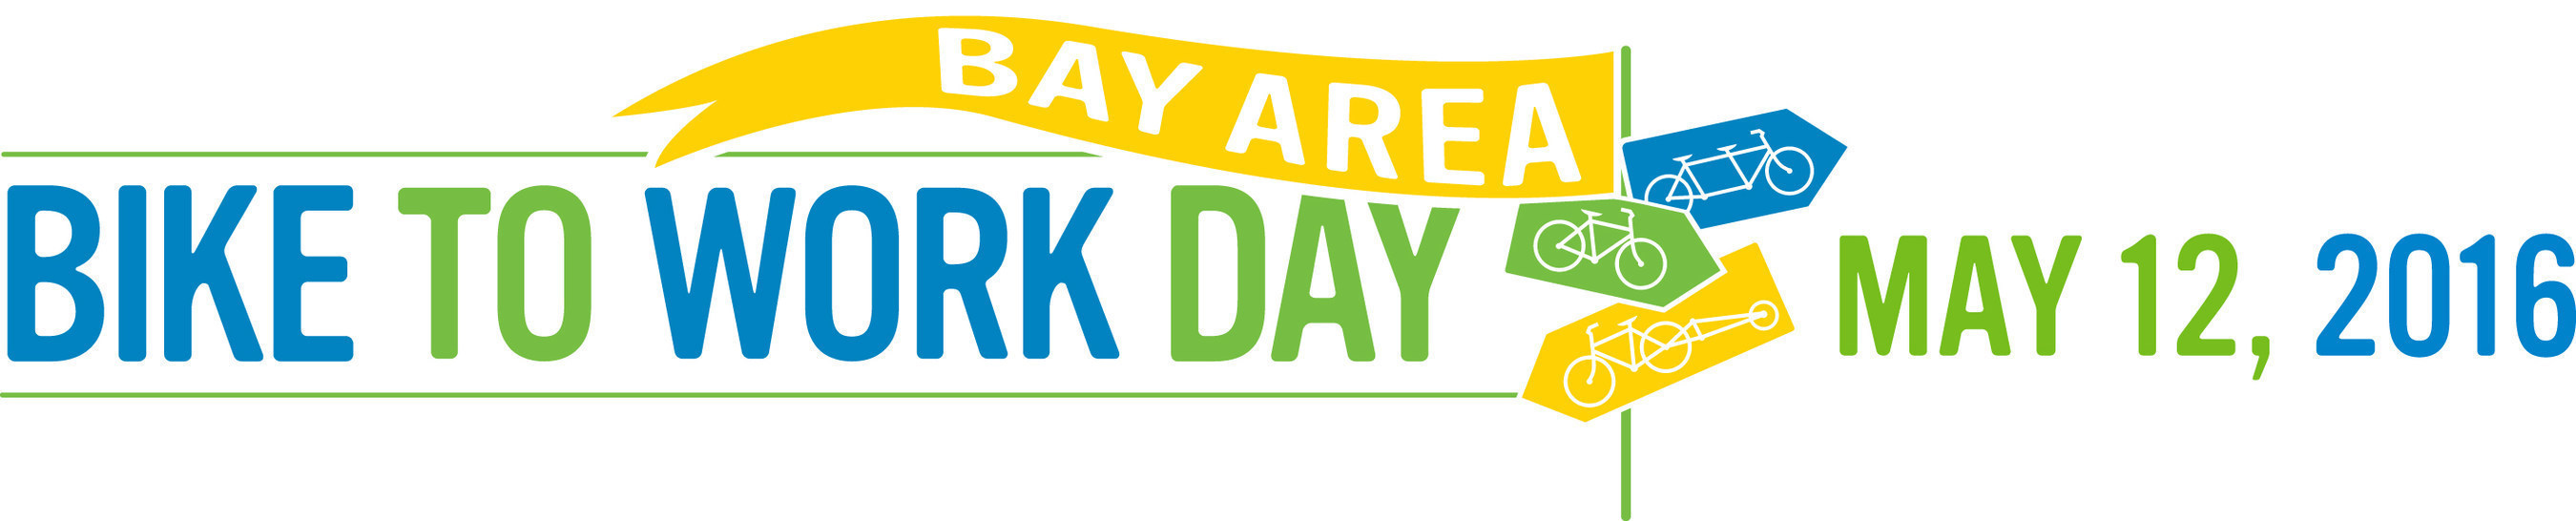 The Bay Area celebrates the 22nd Annual Bike to Work Day on May 12, 2016!